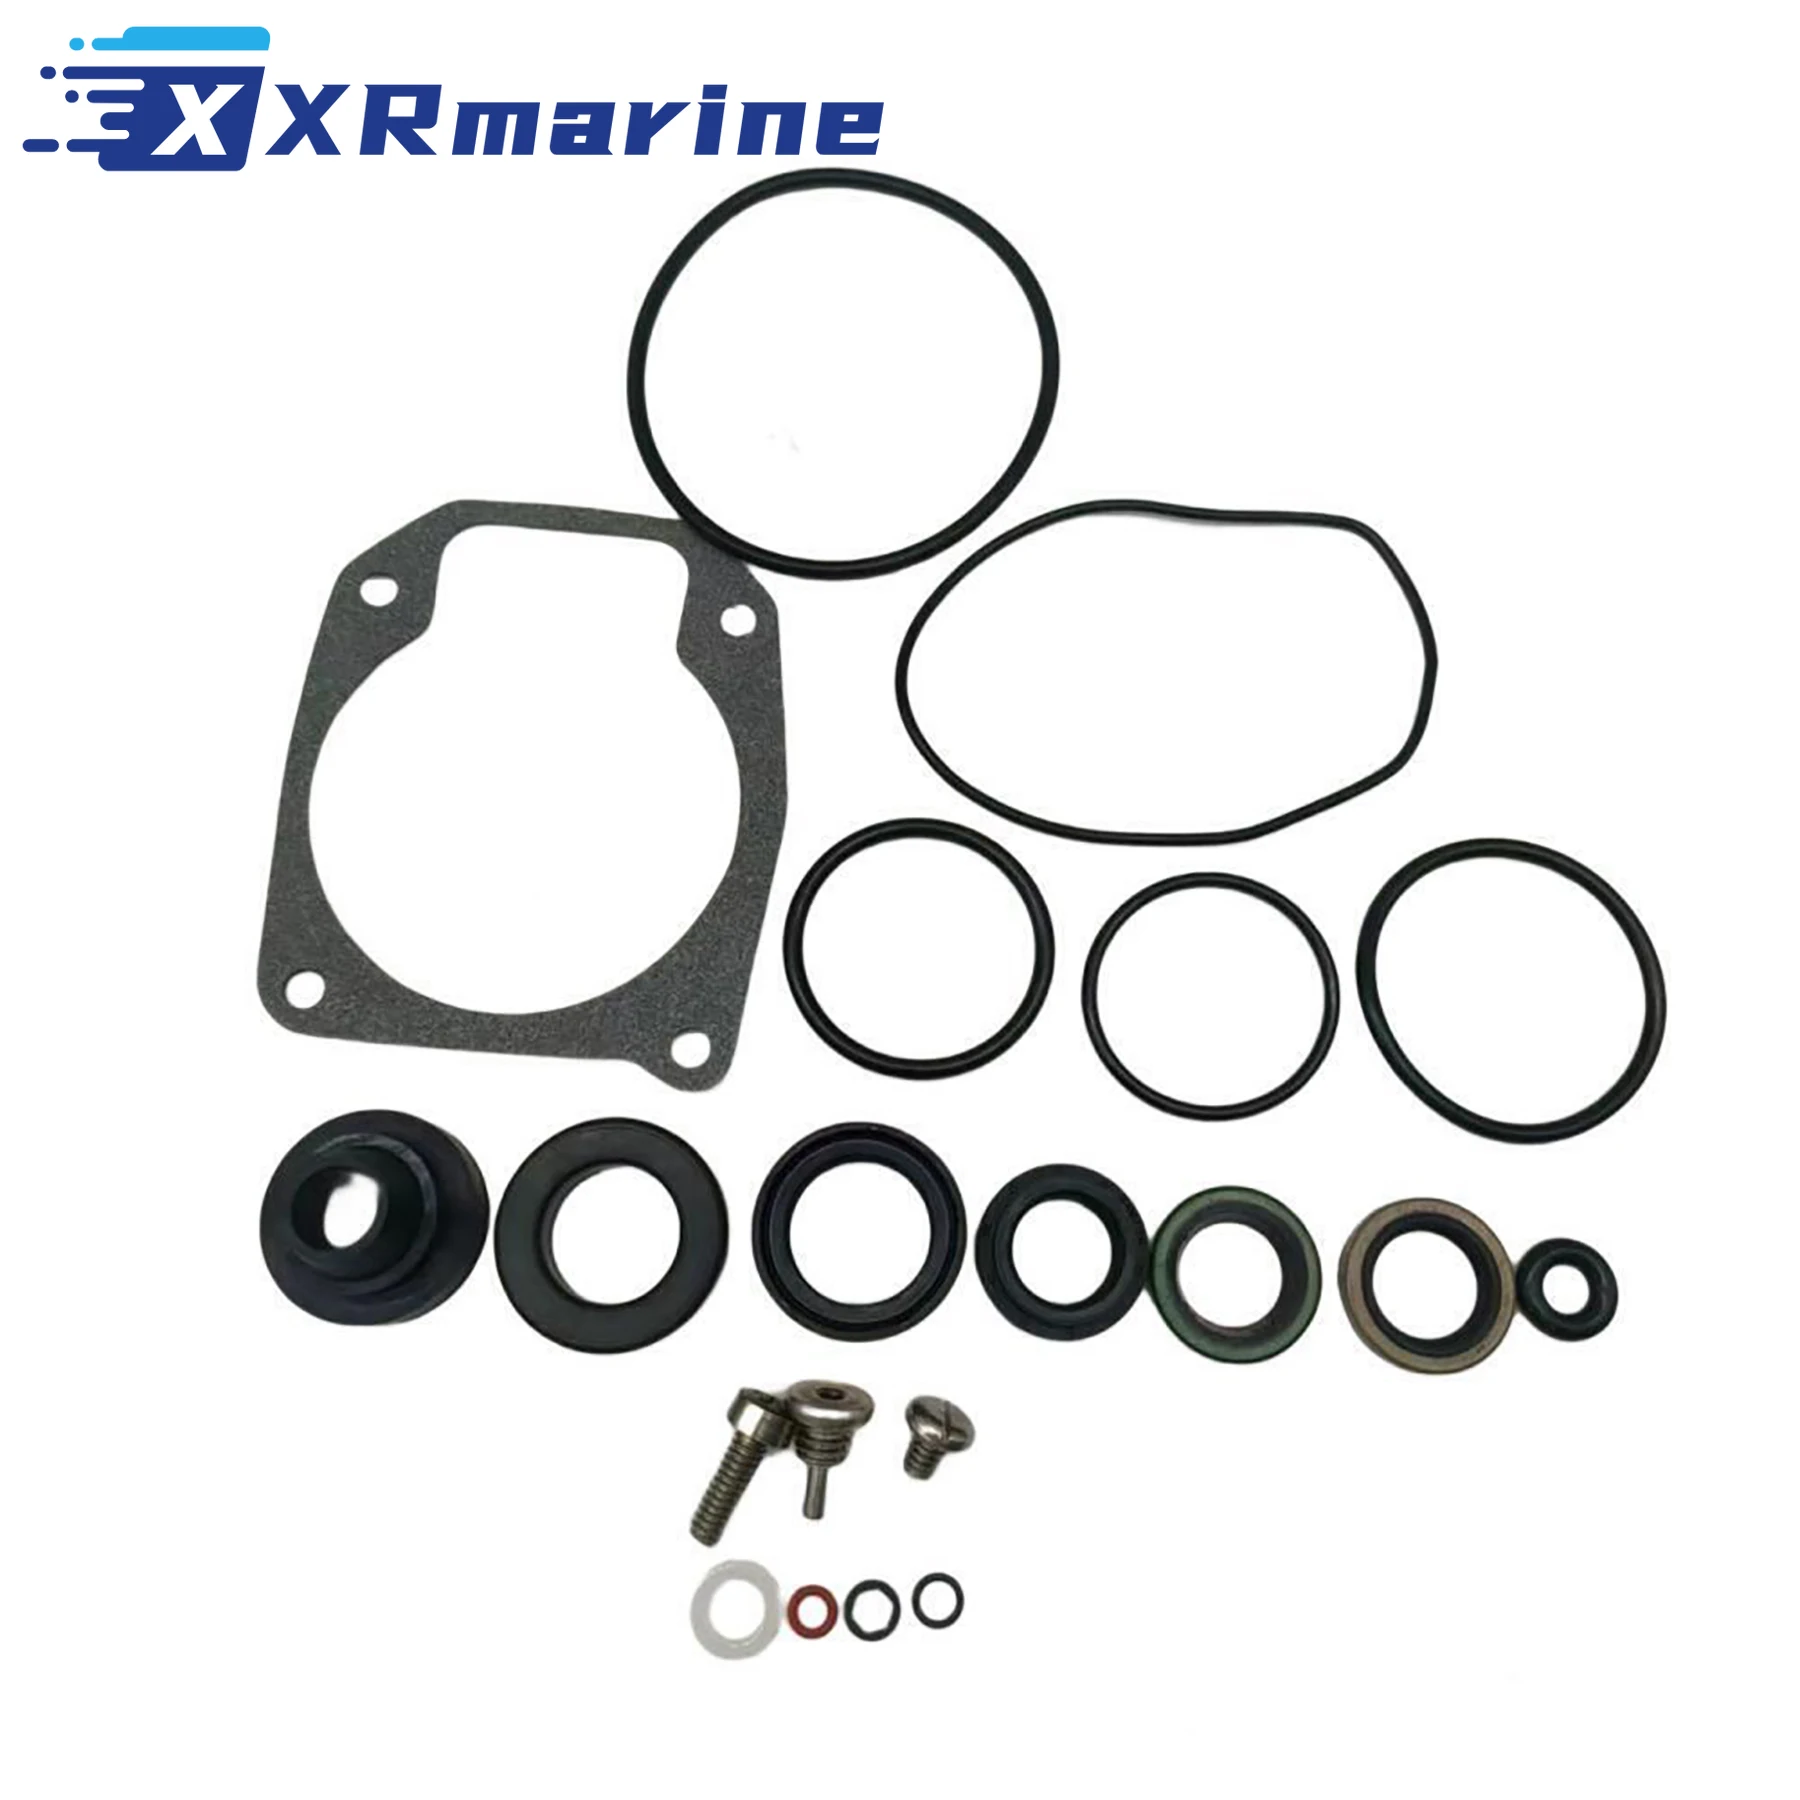 Lower Unit Gearcase Seal Kit For Johnson/Evinrude Outboard 25 40 48 50 HP (1989-2005) Small Housing 433550 0777551 18-2694